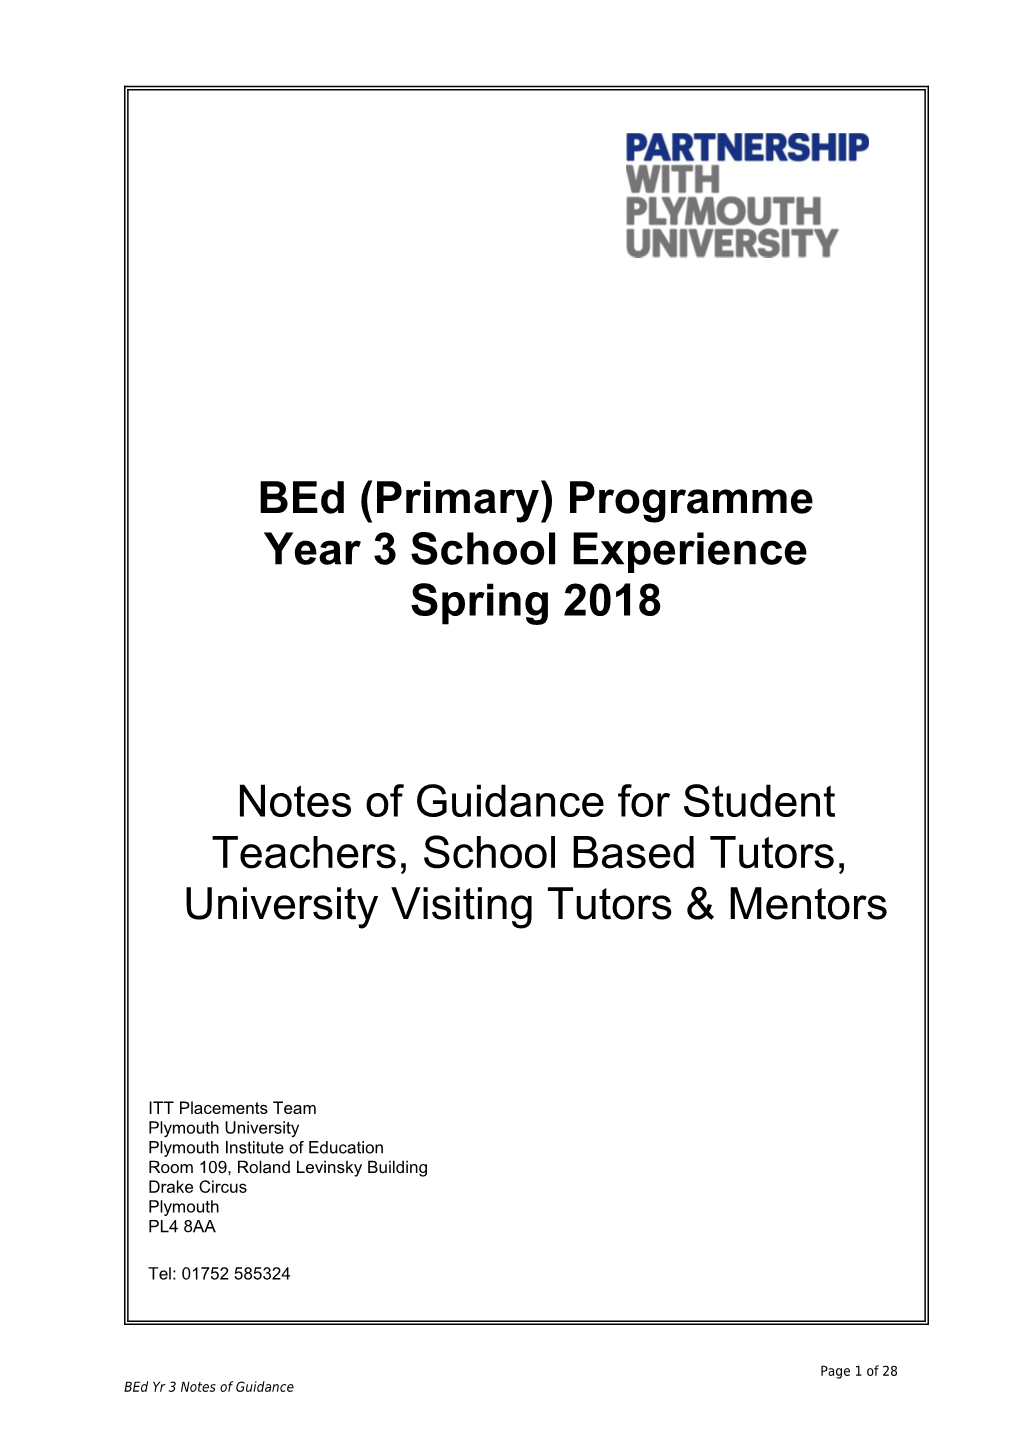 Bed (Primary) Programme